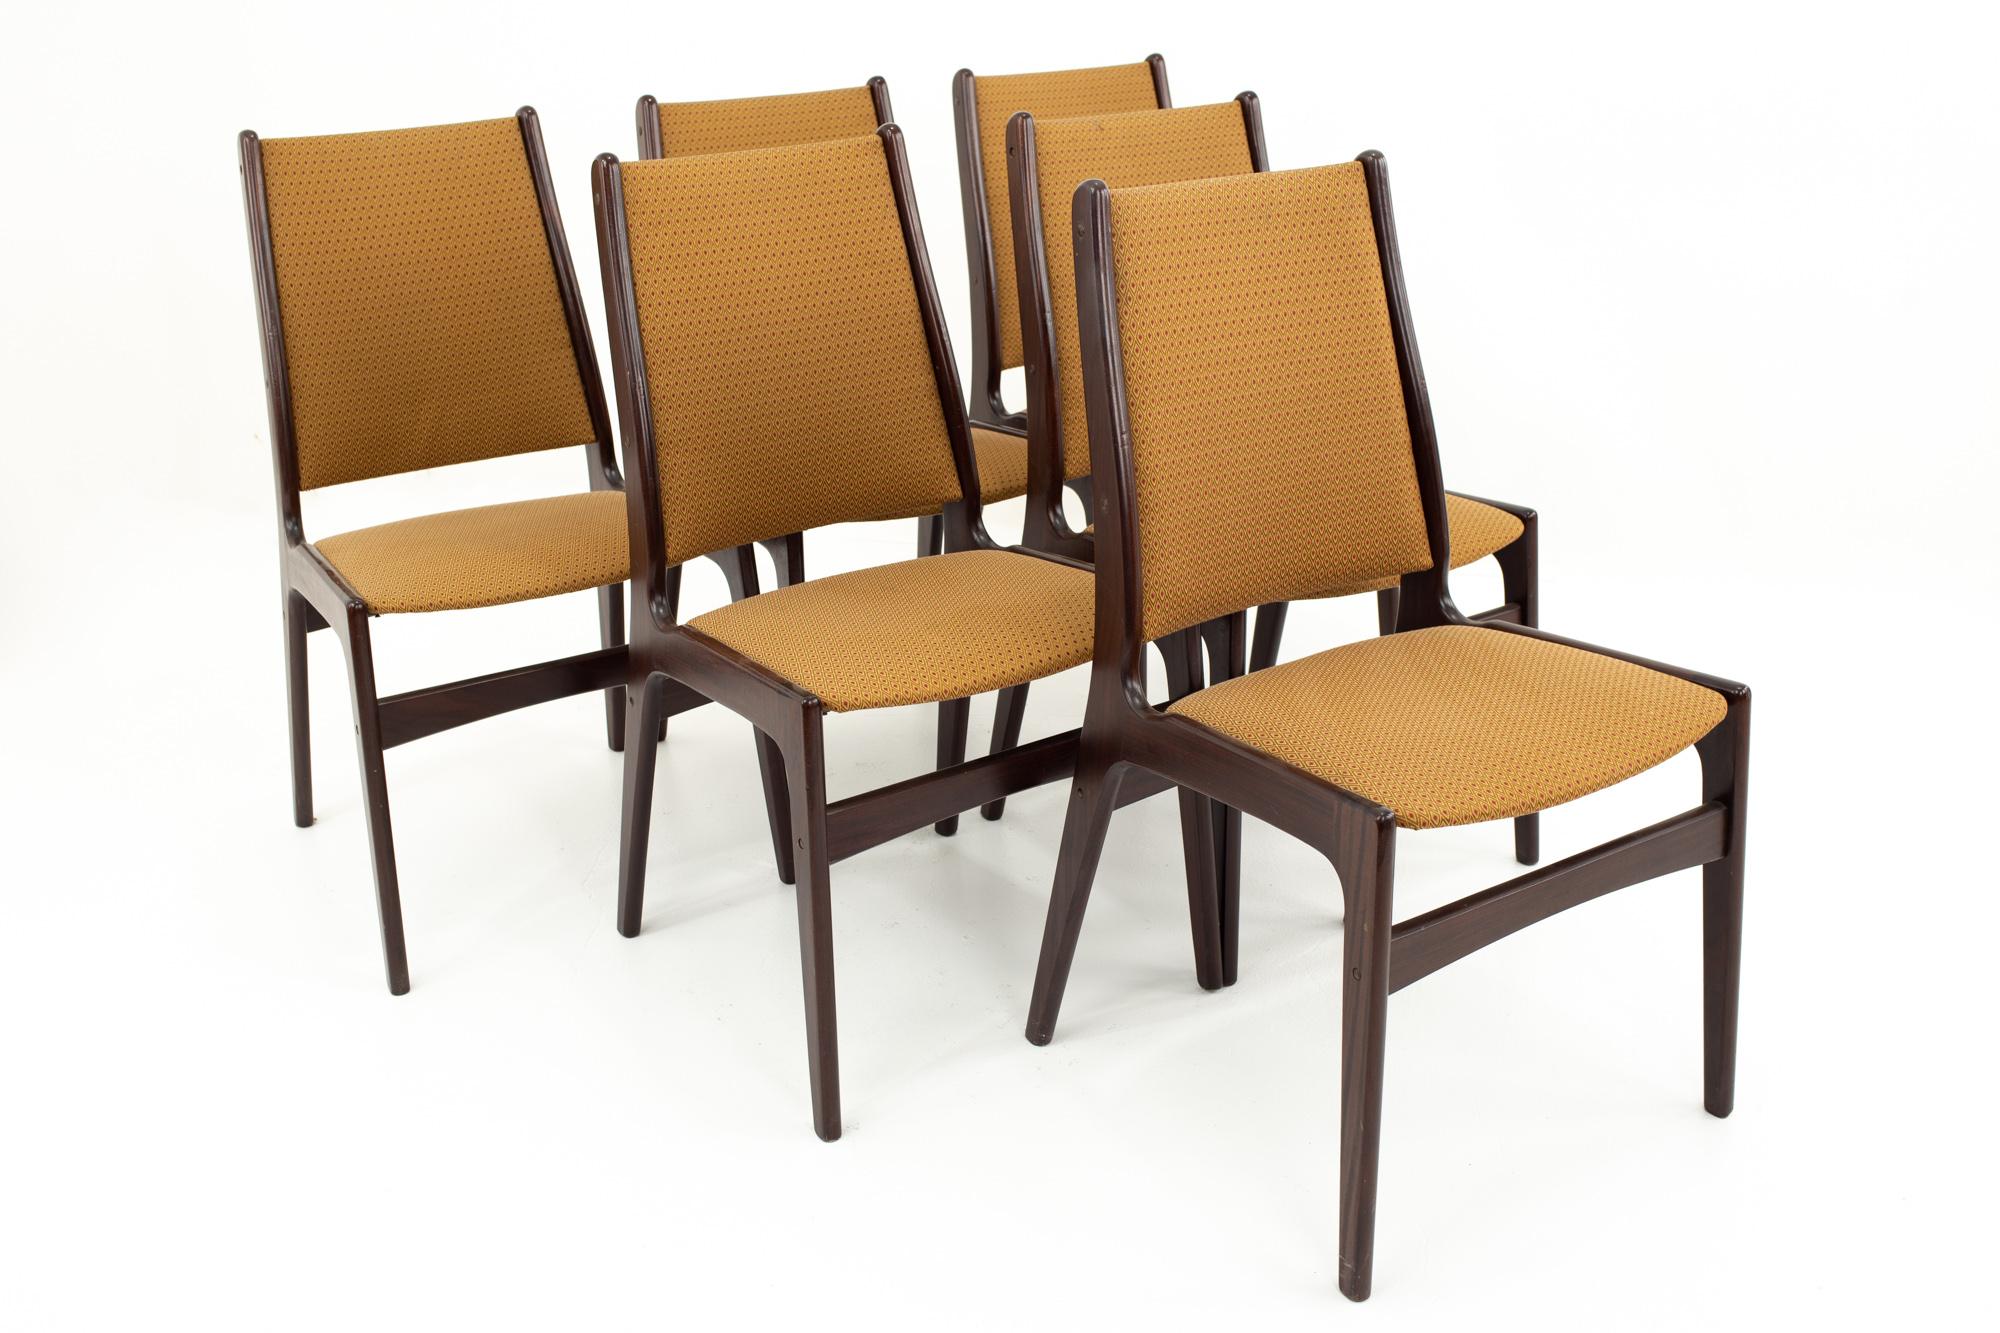 Danish midcentury rosewood dining chairs - Set of 6

Each chair measures: 19 wide x 17 deep x 36 high with a seat height of 18.5 inches

This set is available in what we call Restored Vintage Condition. Upon purchase it is thoroughly cleaned and